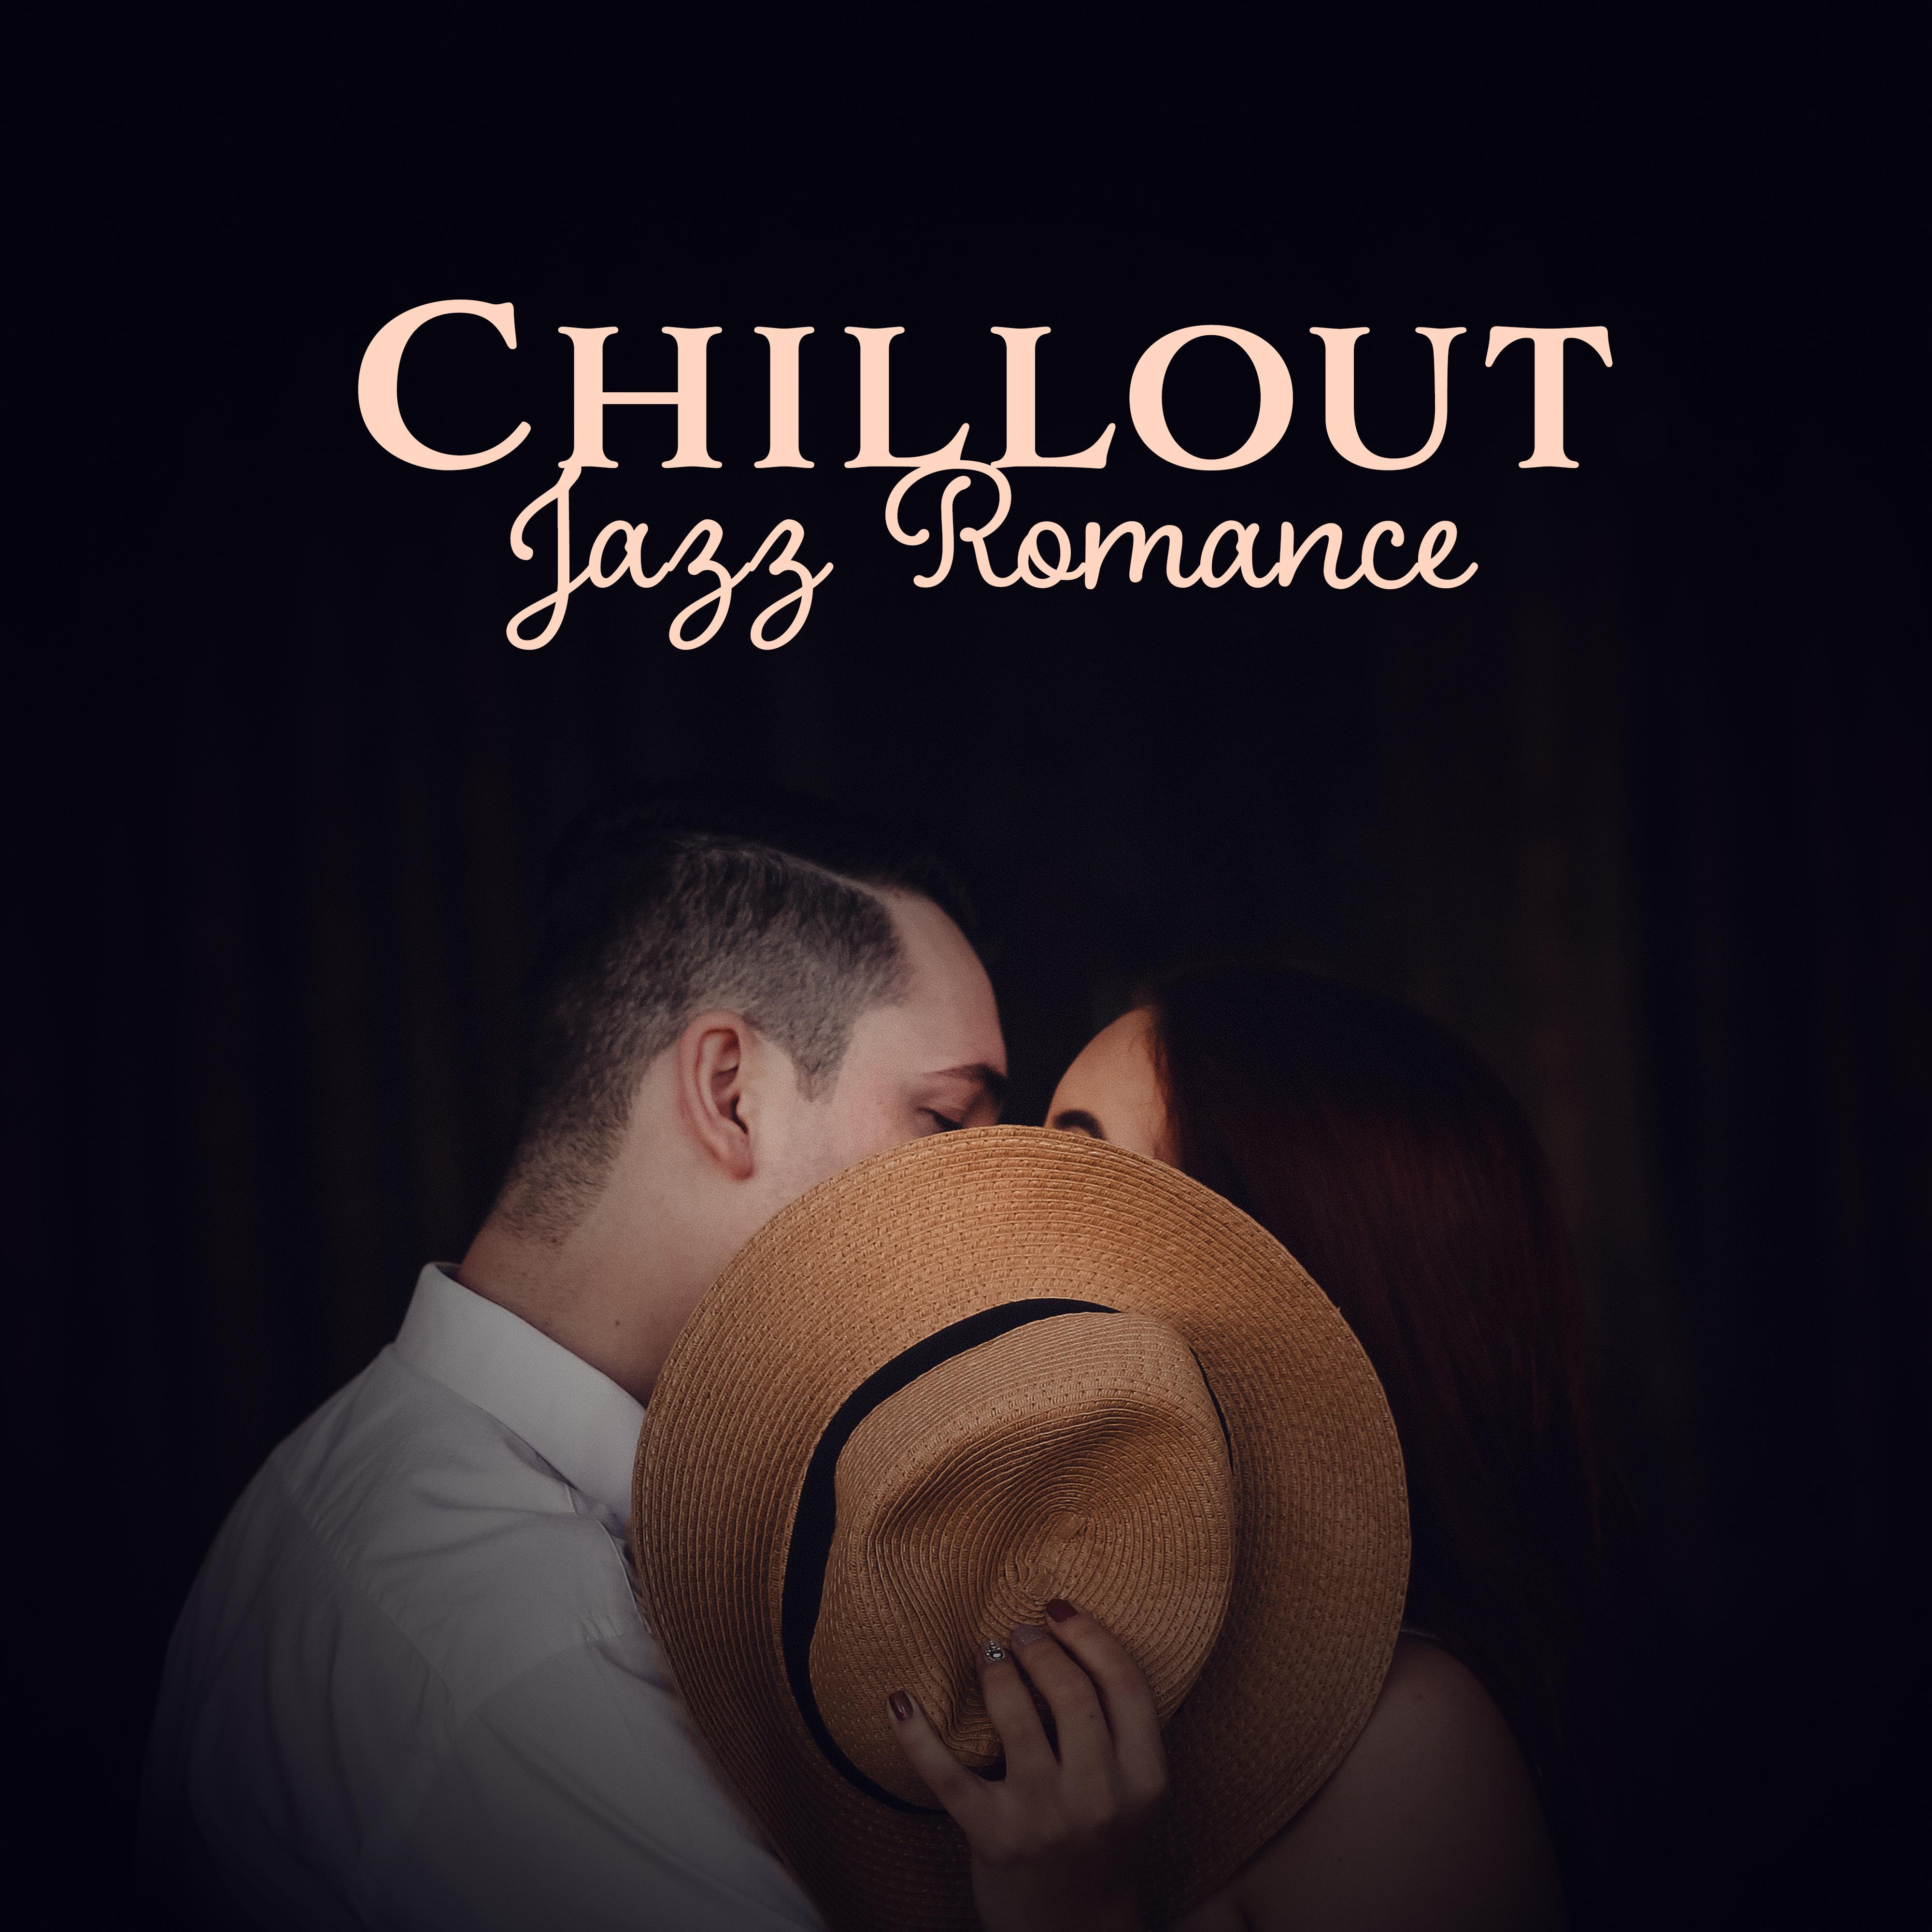 Chillout Jazz Romance  Light Jazz, Instrumental Music, Relaxed Chill